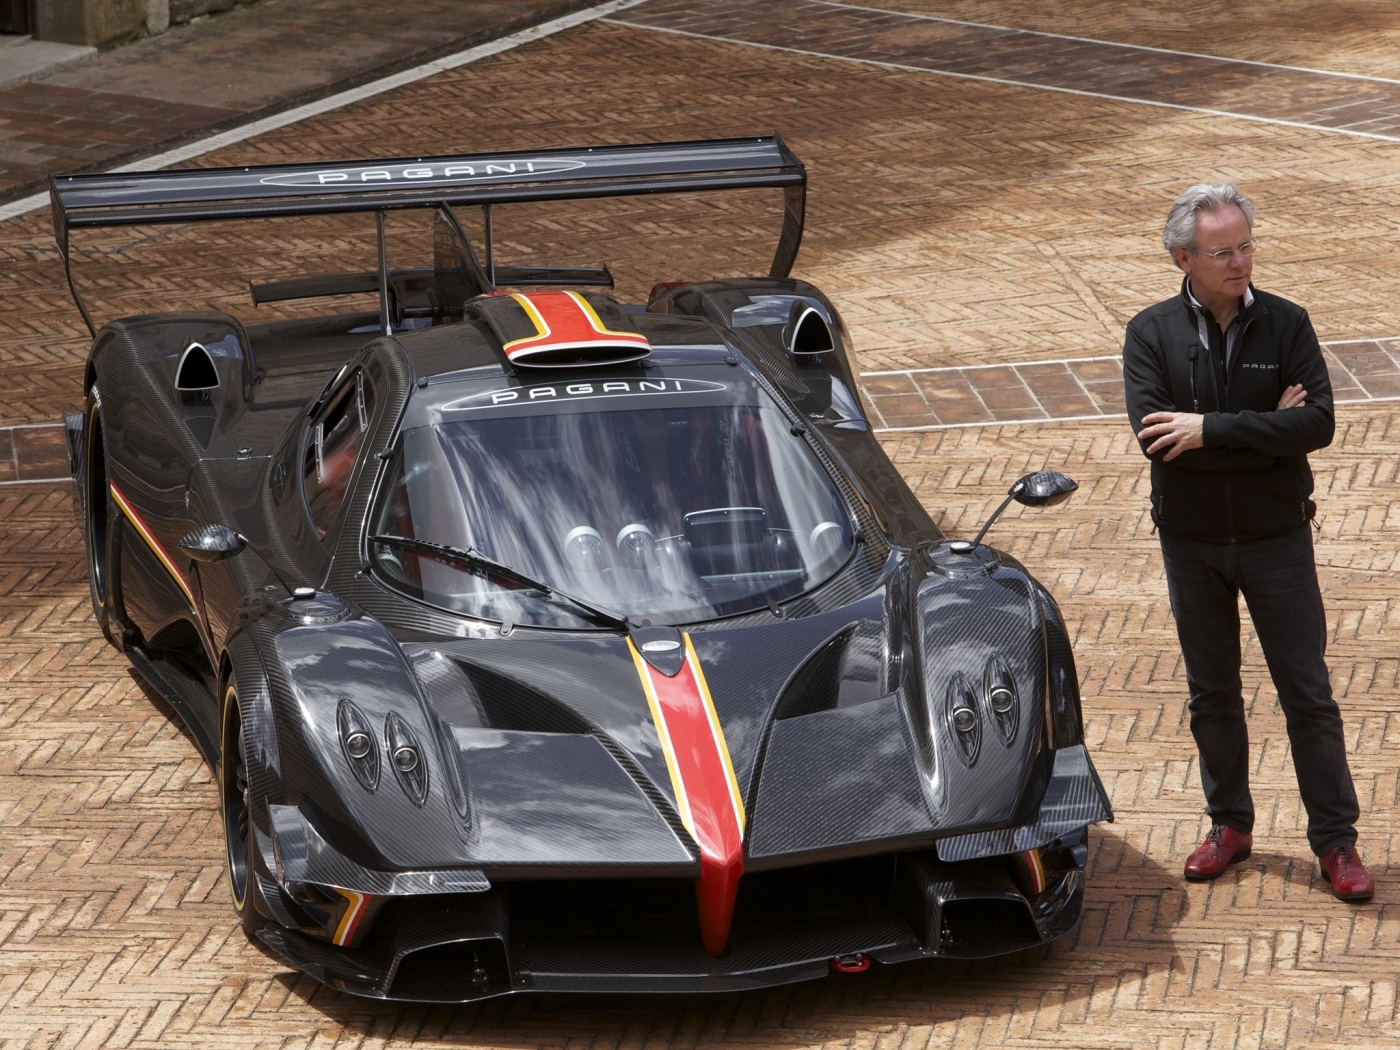 pagani, transport, sports, auto wallpapers for tablet